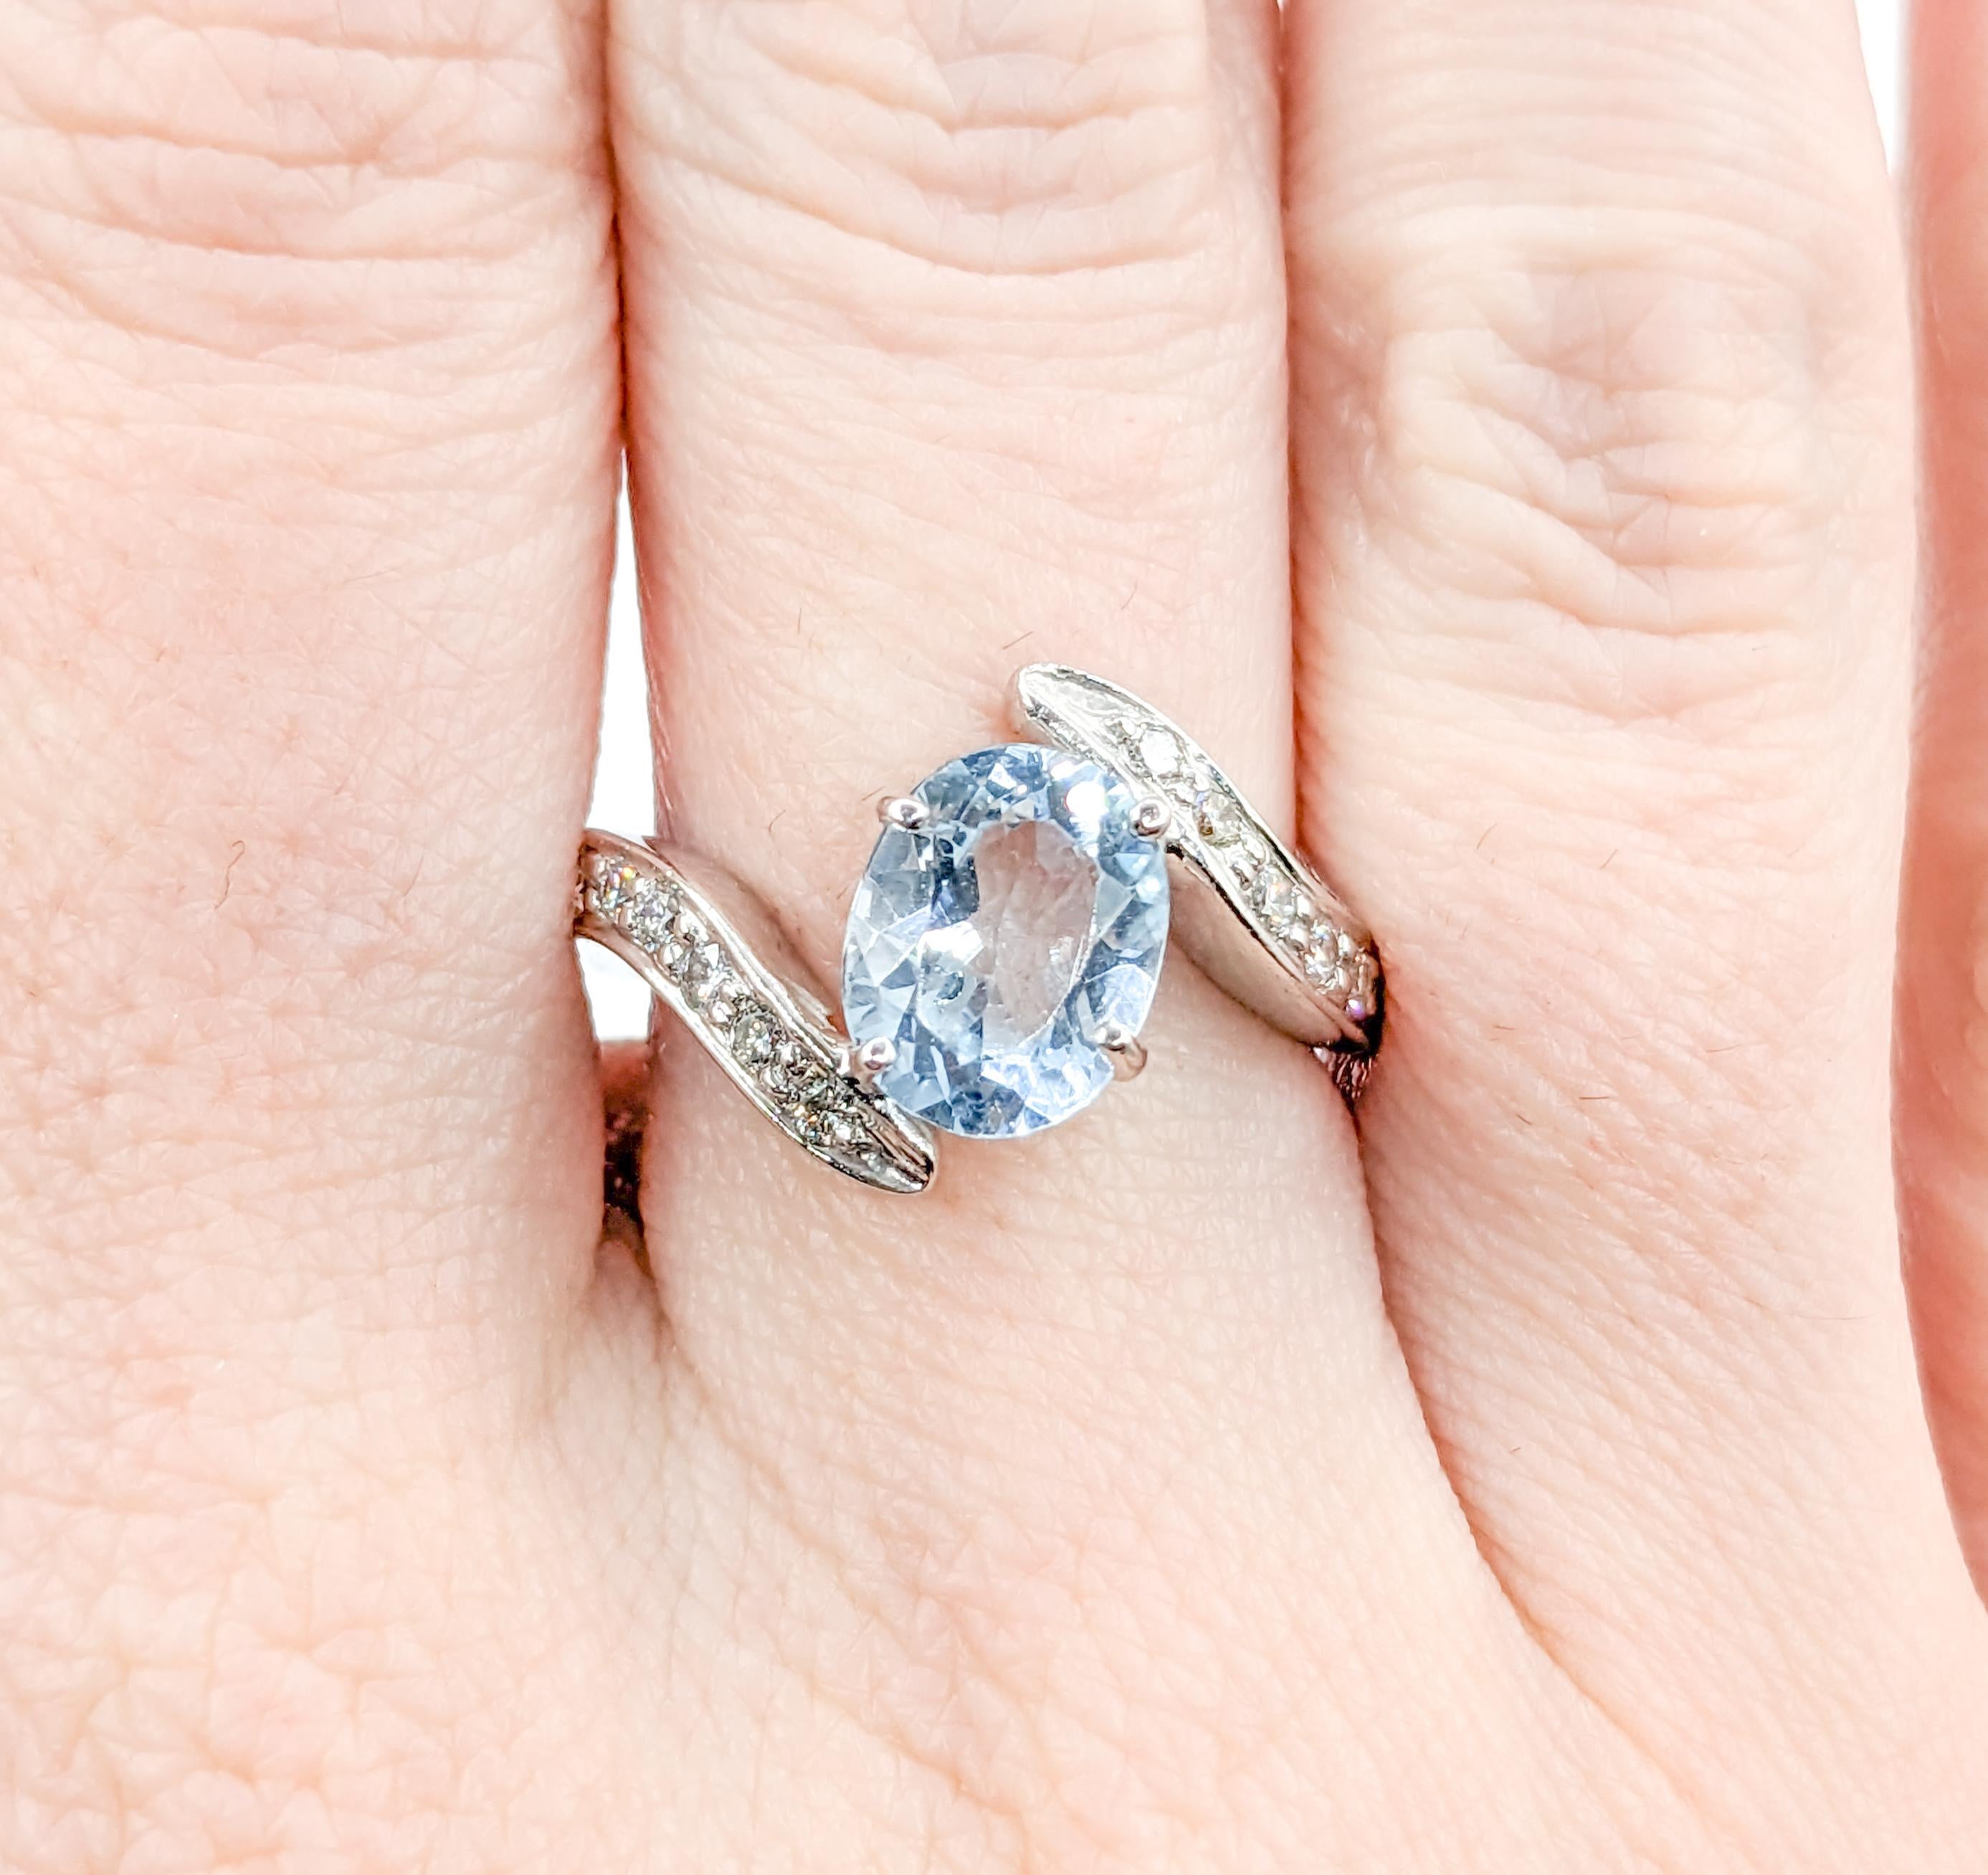 Unique Bypass Aquamarine & Diamond Ring in White Gold

Elevate your style with this exquisite 14k white gold ring, a true embodiment of beauty and sophistication. This stunning piece showcases a captivating 1.75 carat oval cut Aquamarine alongside a